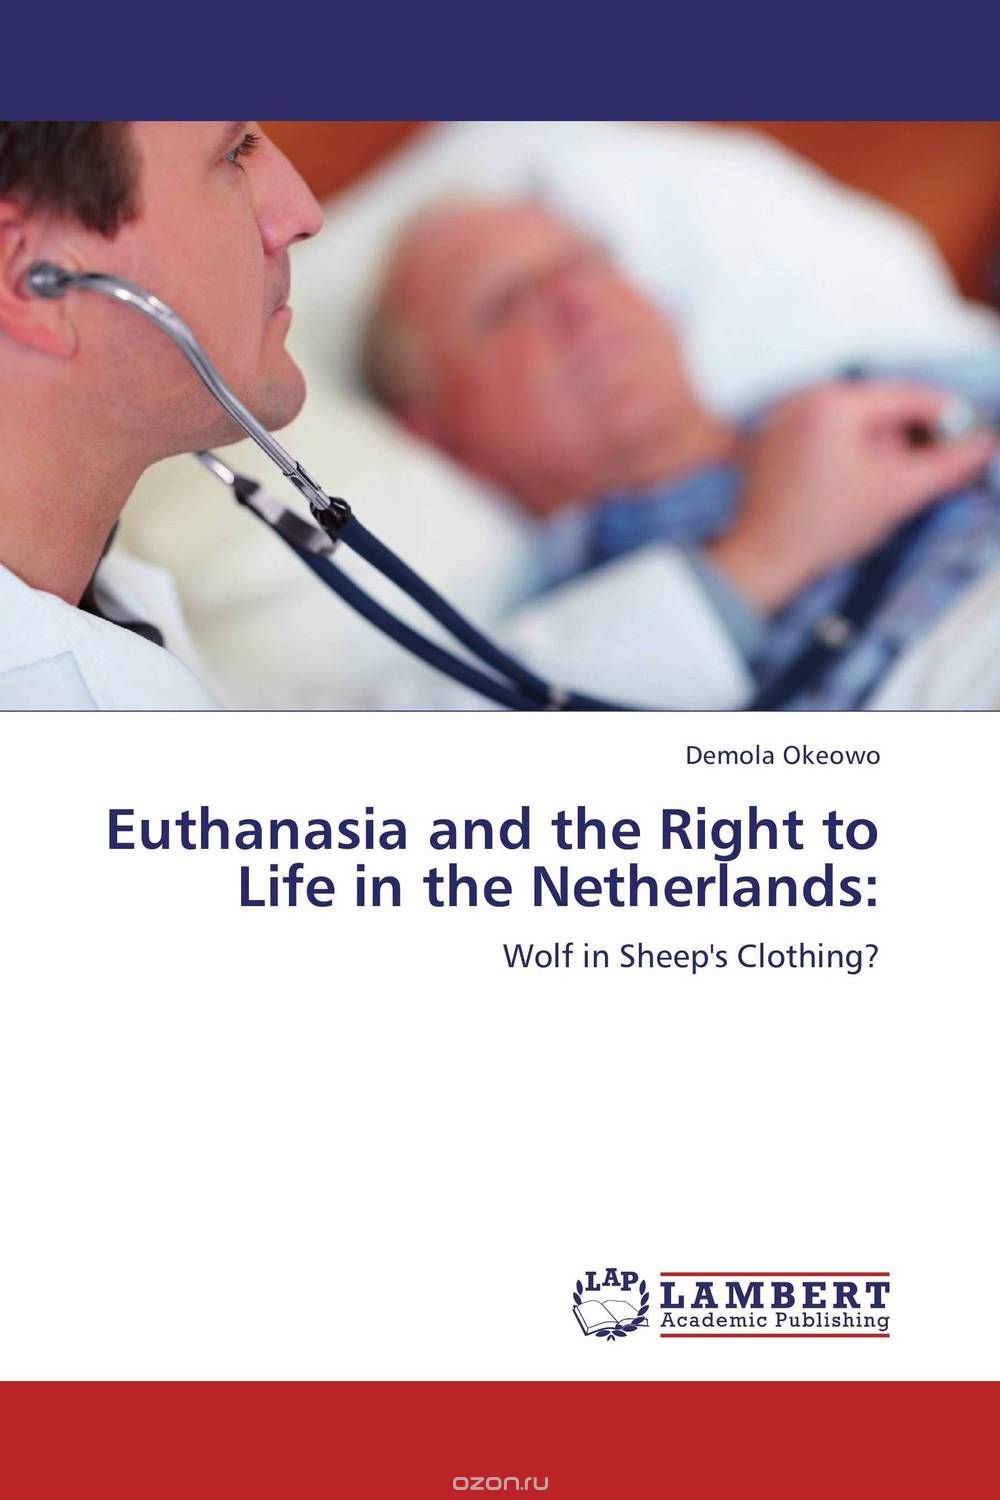 Скачать книгу "Euthanasia and the Right to Life in the Netherlands:"